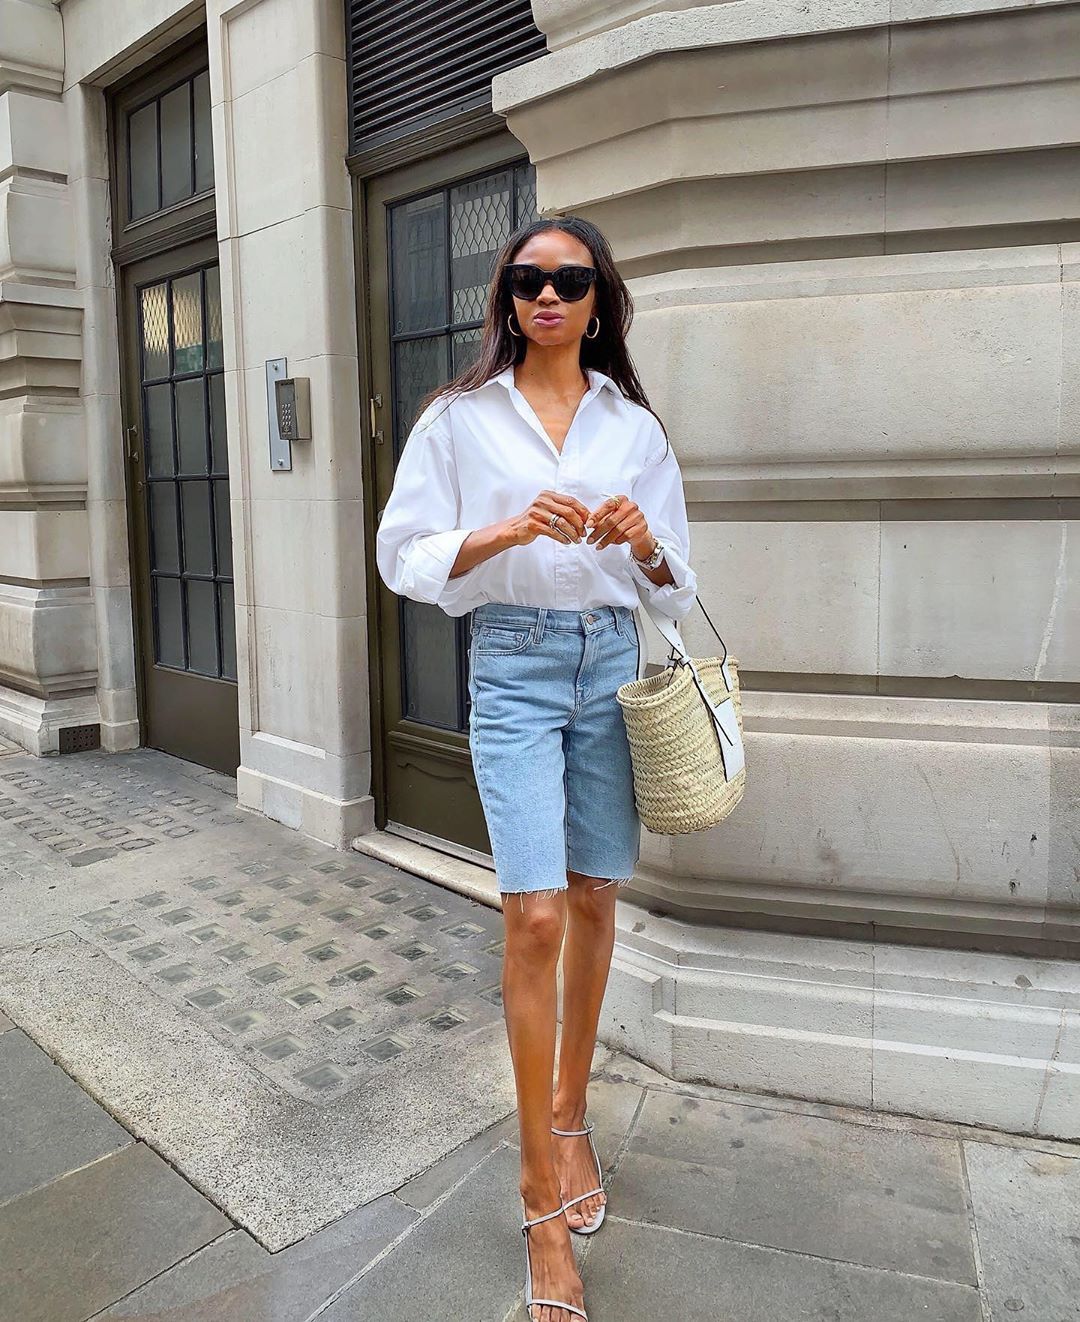 J BRAND - @symphonyofsilk in the Relaxed Bermuda Short—our favorite sustainable summer piece that can be dressed or down  #inmyjbrand #ecofriendly #denim